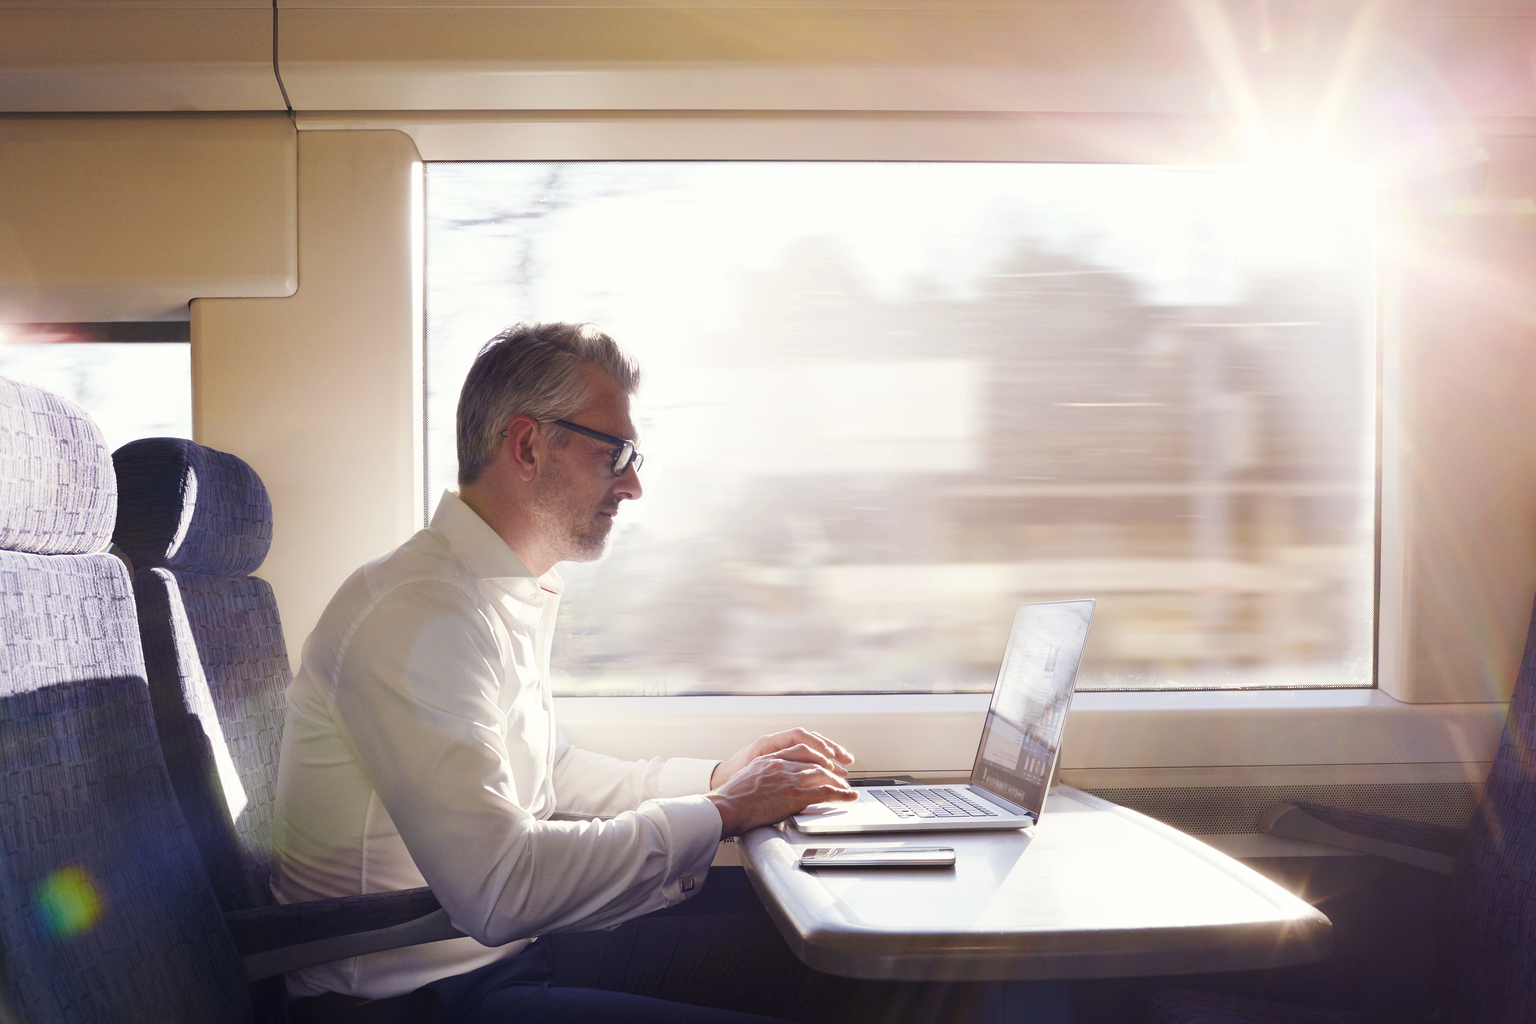 Man working on his Laptop in the train